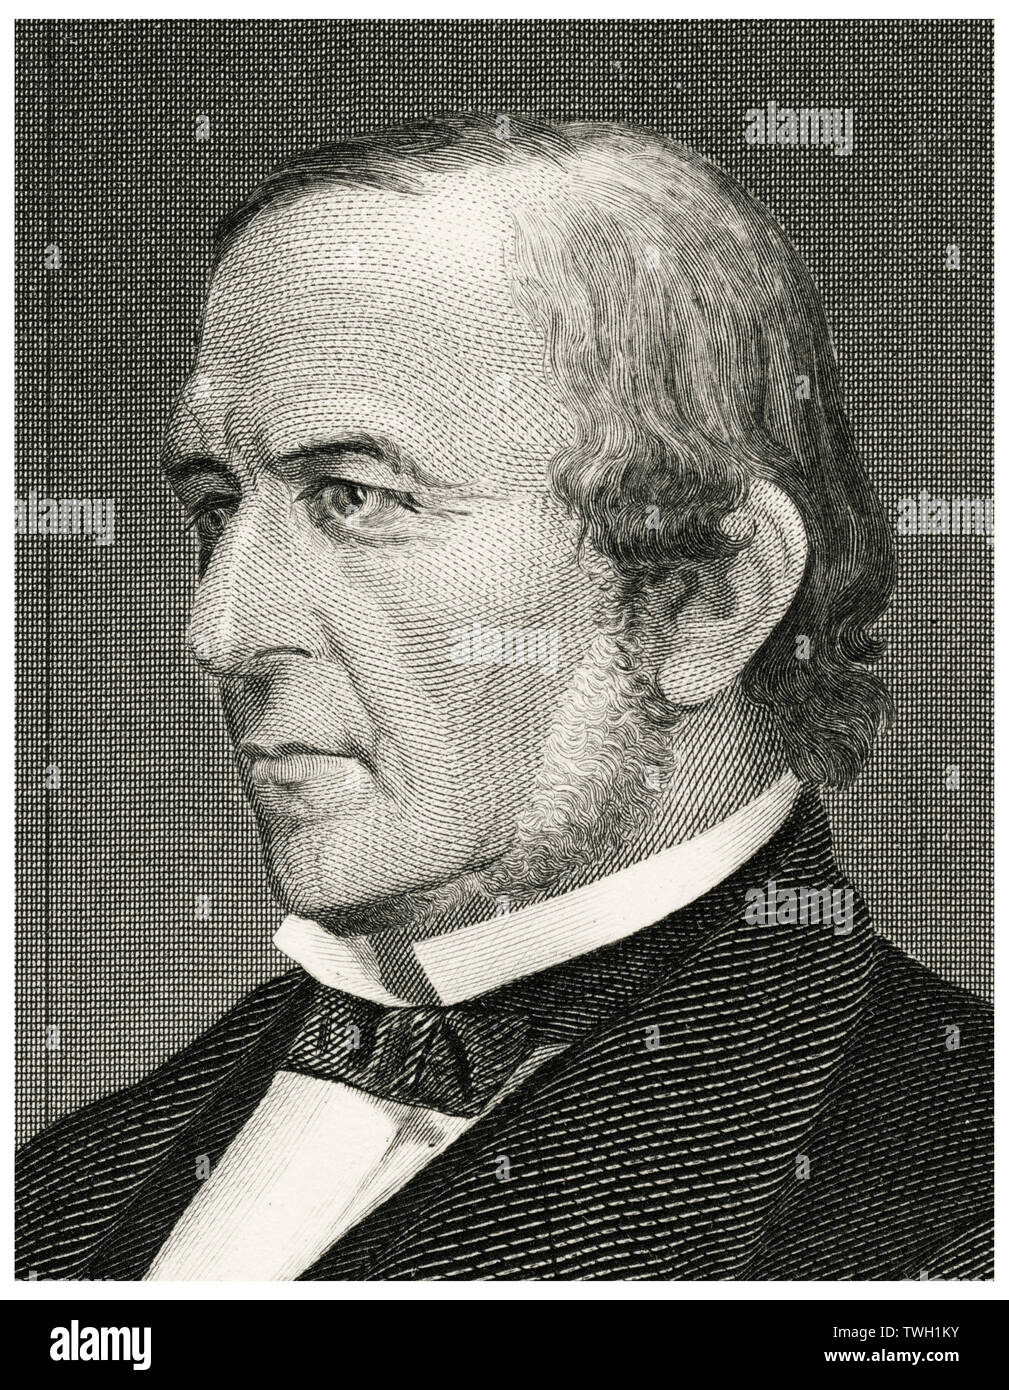 William Ewert Gladstone (1809-98), British Politician and Prime Minister spread over four terms beginning in 1868 and ending in 1894, Head and Shoulders Portrait, Steel Engraving, Portrait Gallery of Eminent Men and Women of Europe and America by Evert A. Duyckinck, Published by Henry J. Johnson, Johnson, Wilson & Company, New York, 1873 Stock Photo